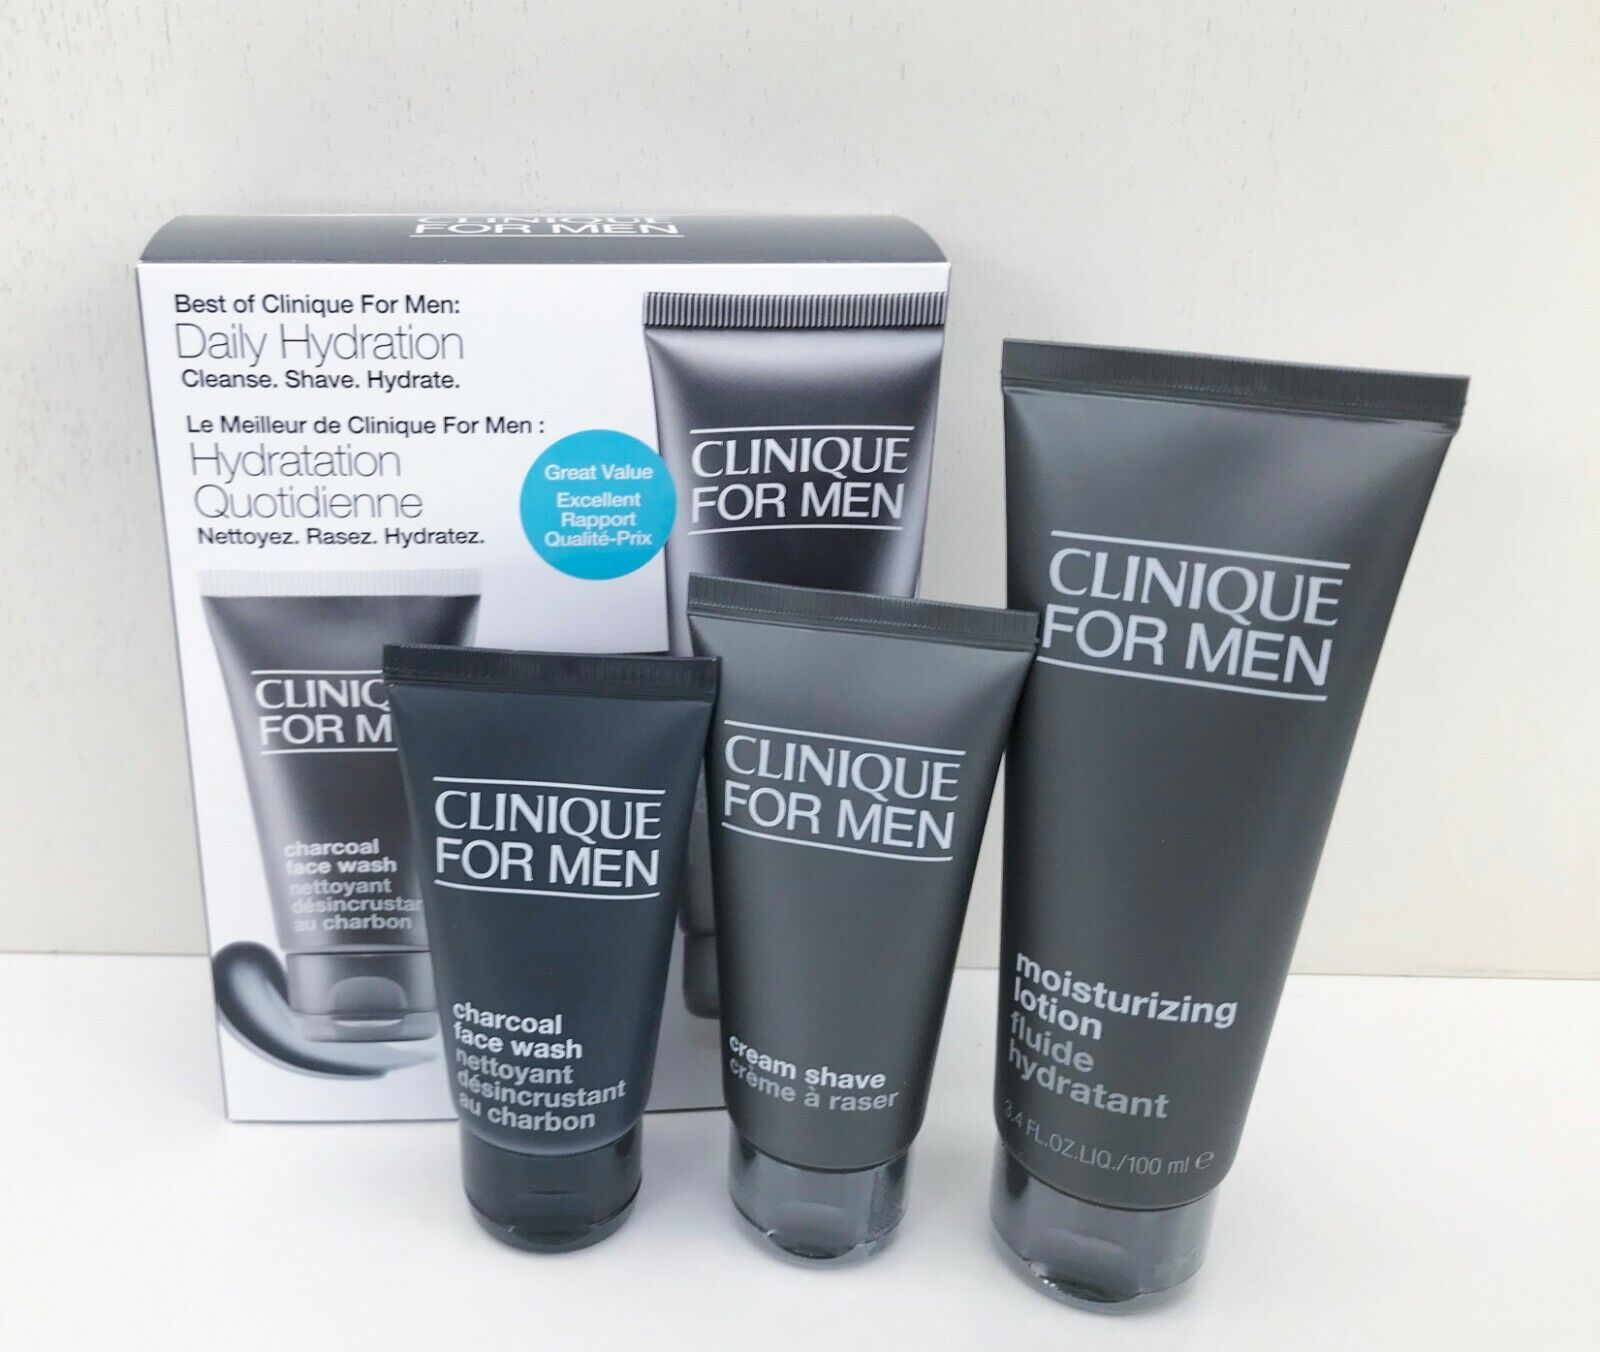 Clinique For Men Daily Hydration Set, Charcoal Face Wash, Cream Shave & Lotion